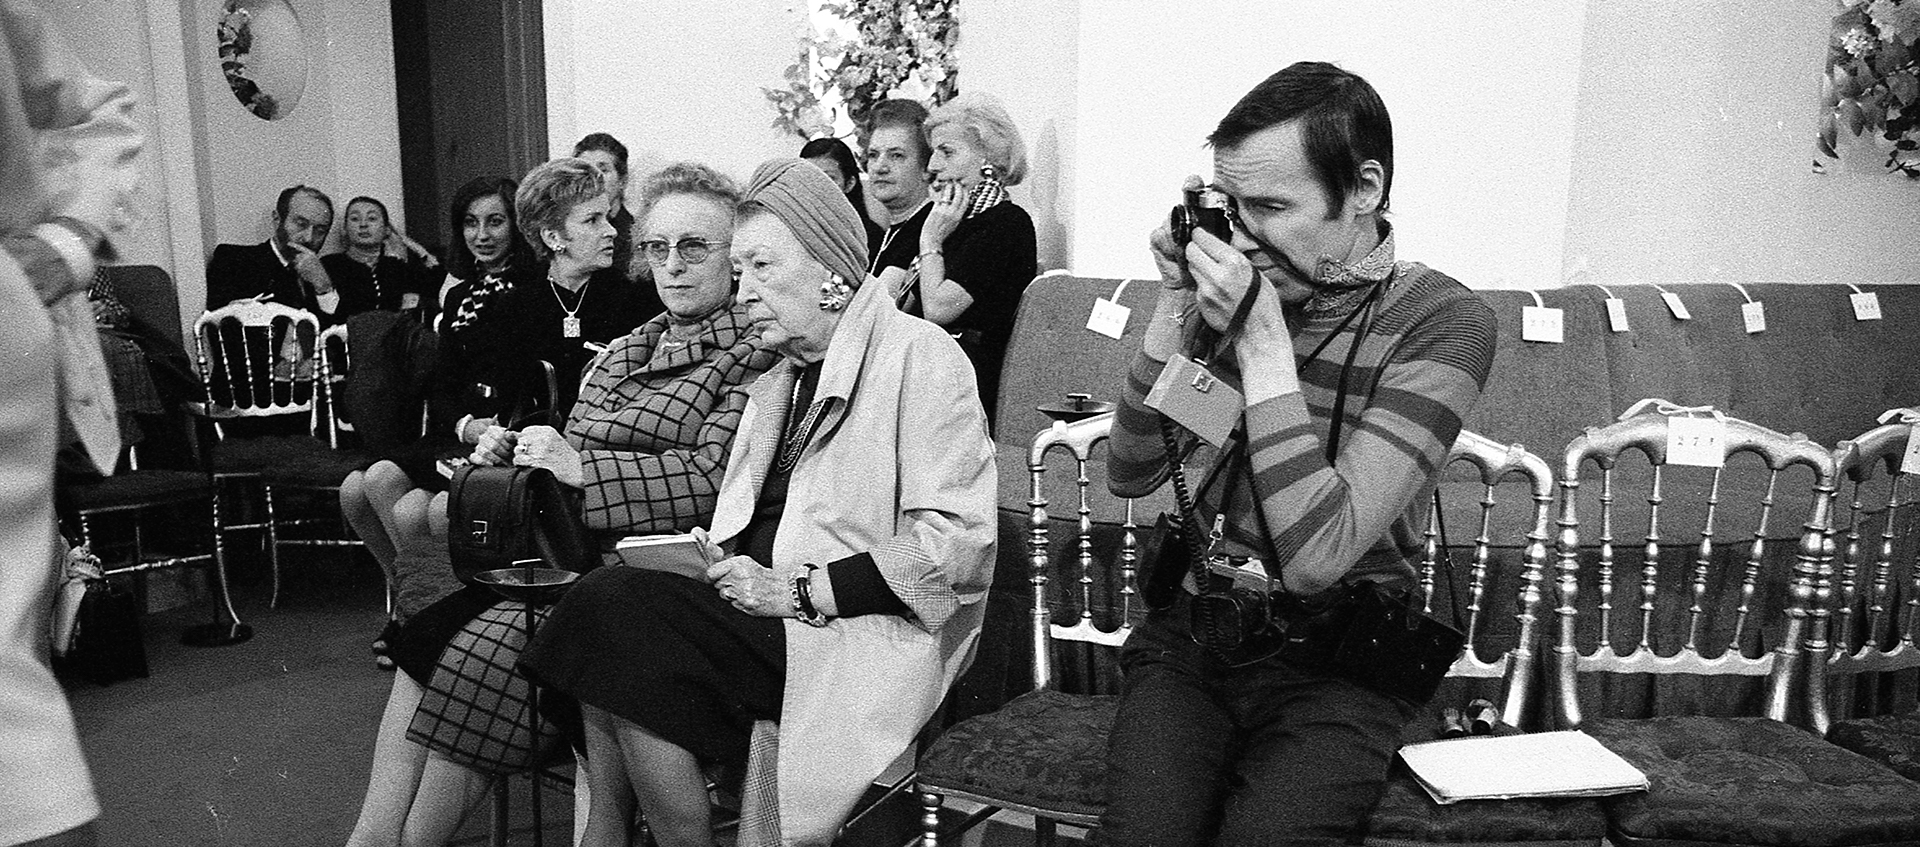 Photographer Bill Cunningham taking a shot seated among onlookers in Paris 1971.